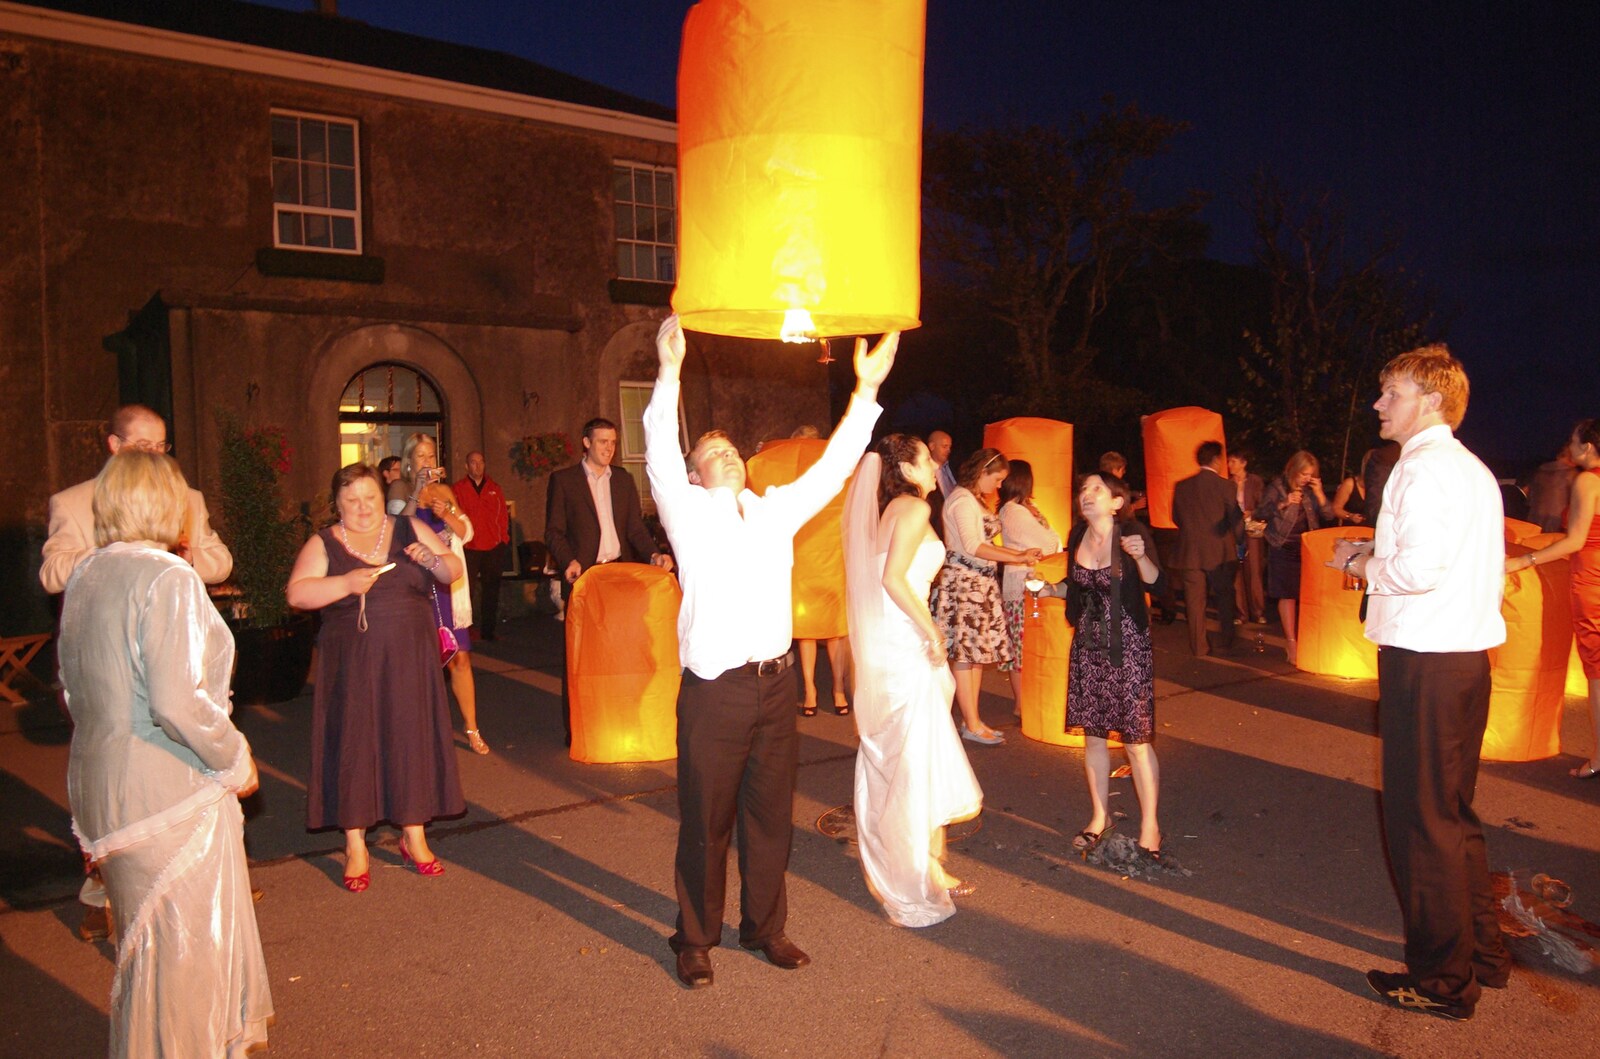 Another lantern is ready to go from Julie and Cameron's Wedding, Ballintaggart House, Dingle - 24th July 2009